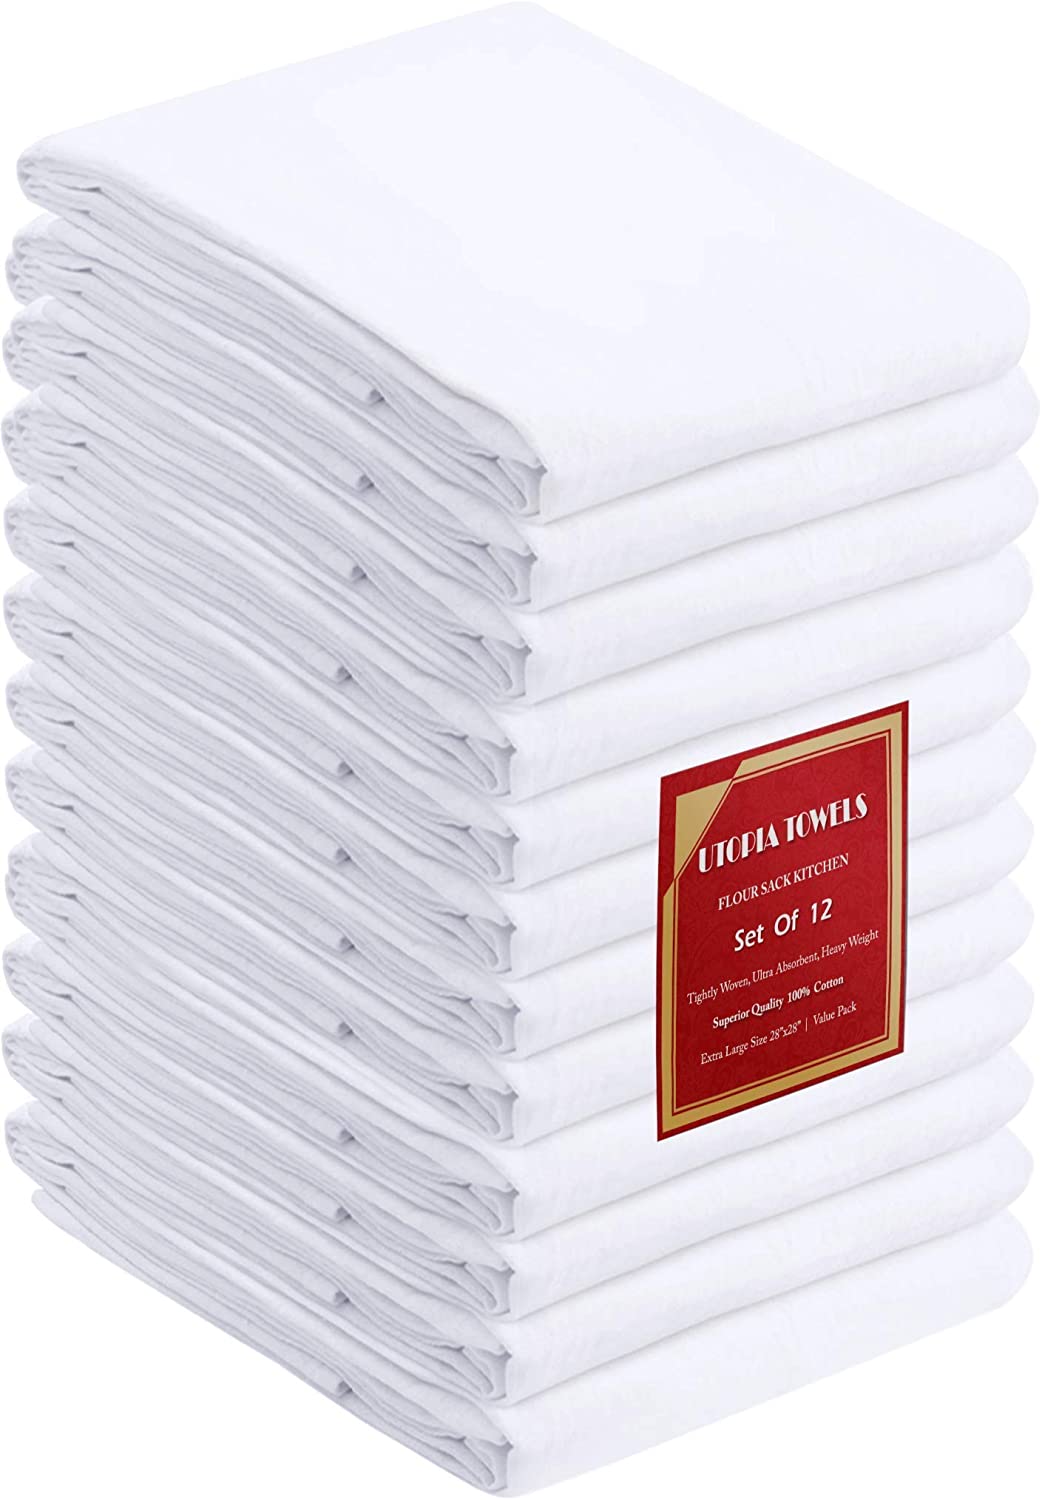 White & Natural Flour Sack Towels, Sample Pack 27 x 27 Inches, 100